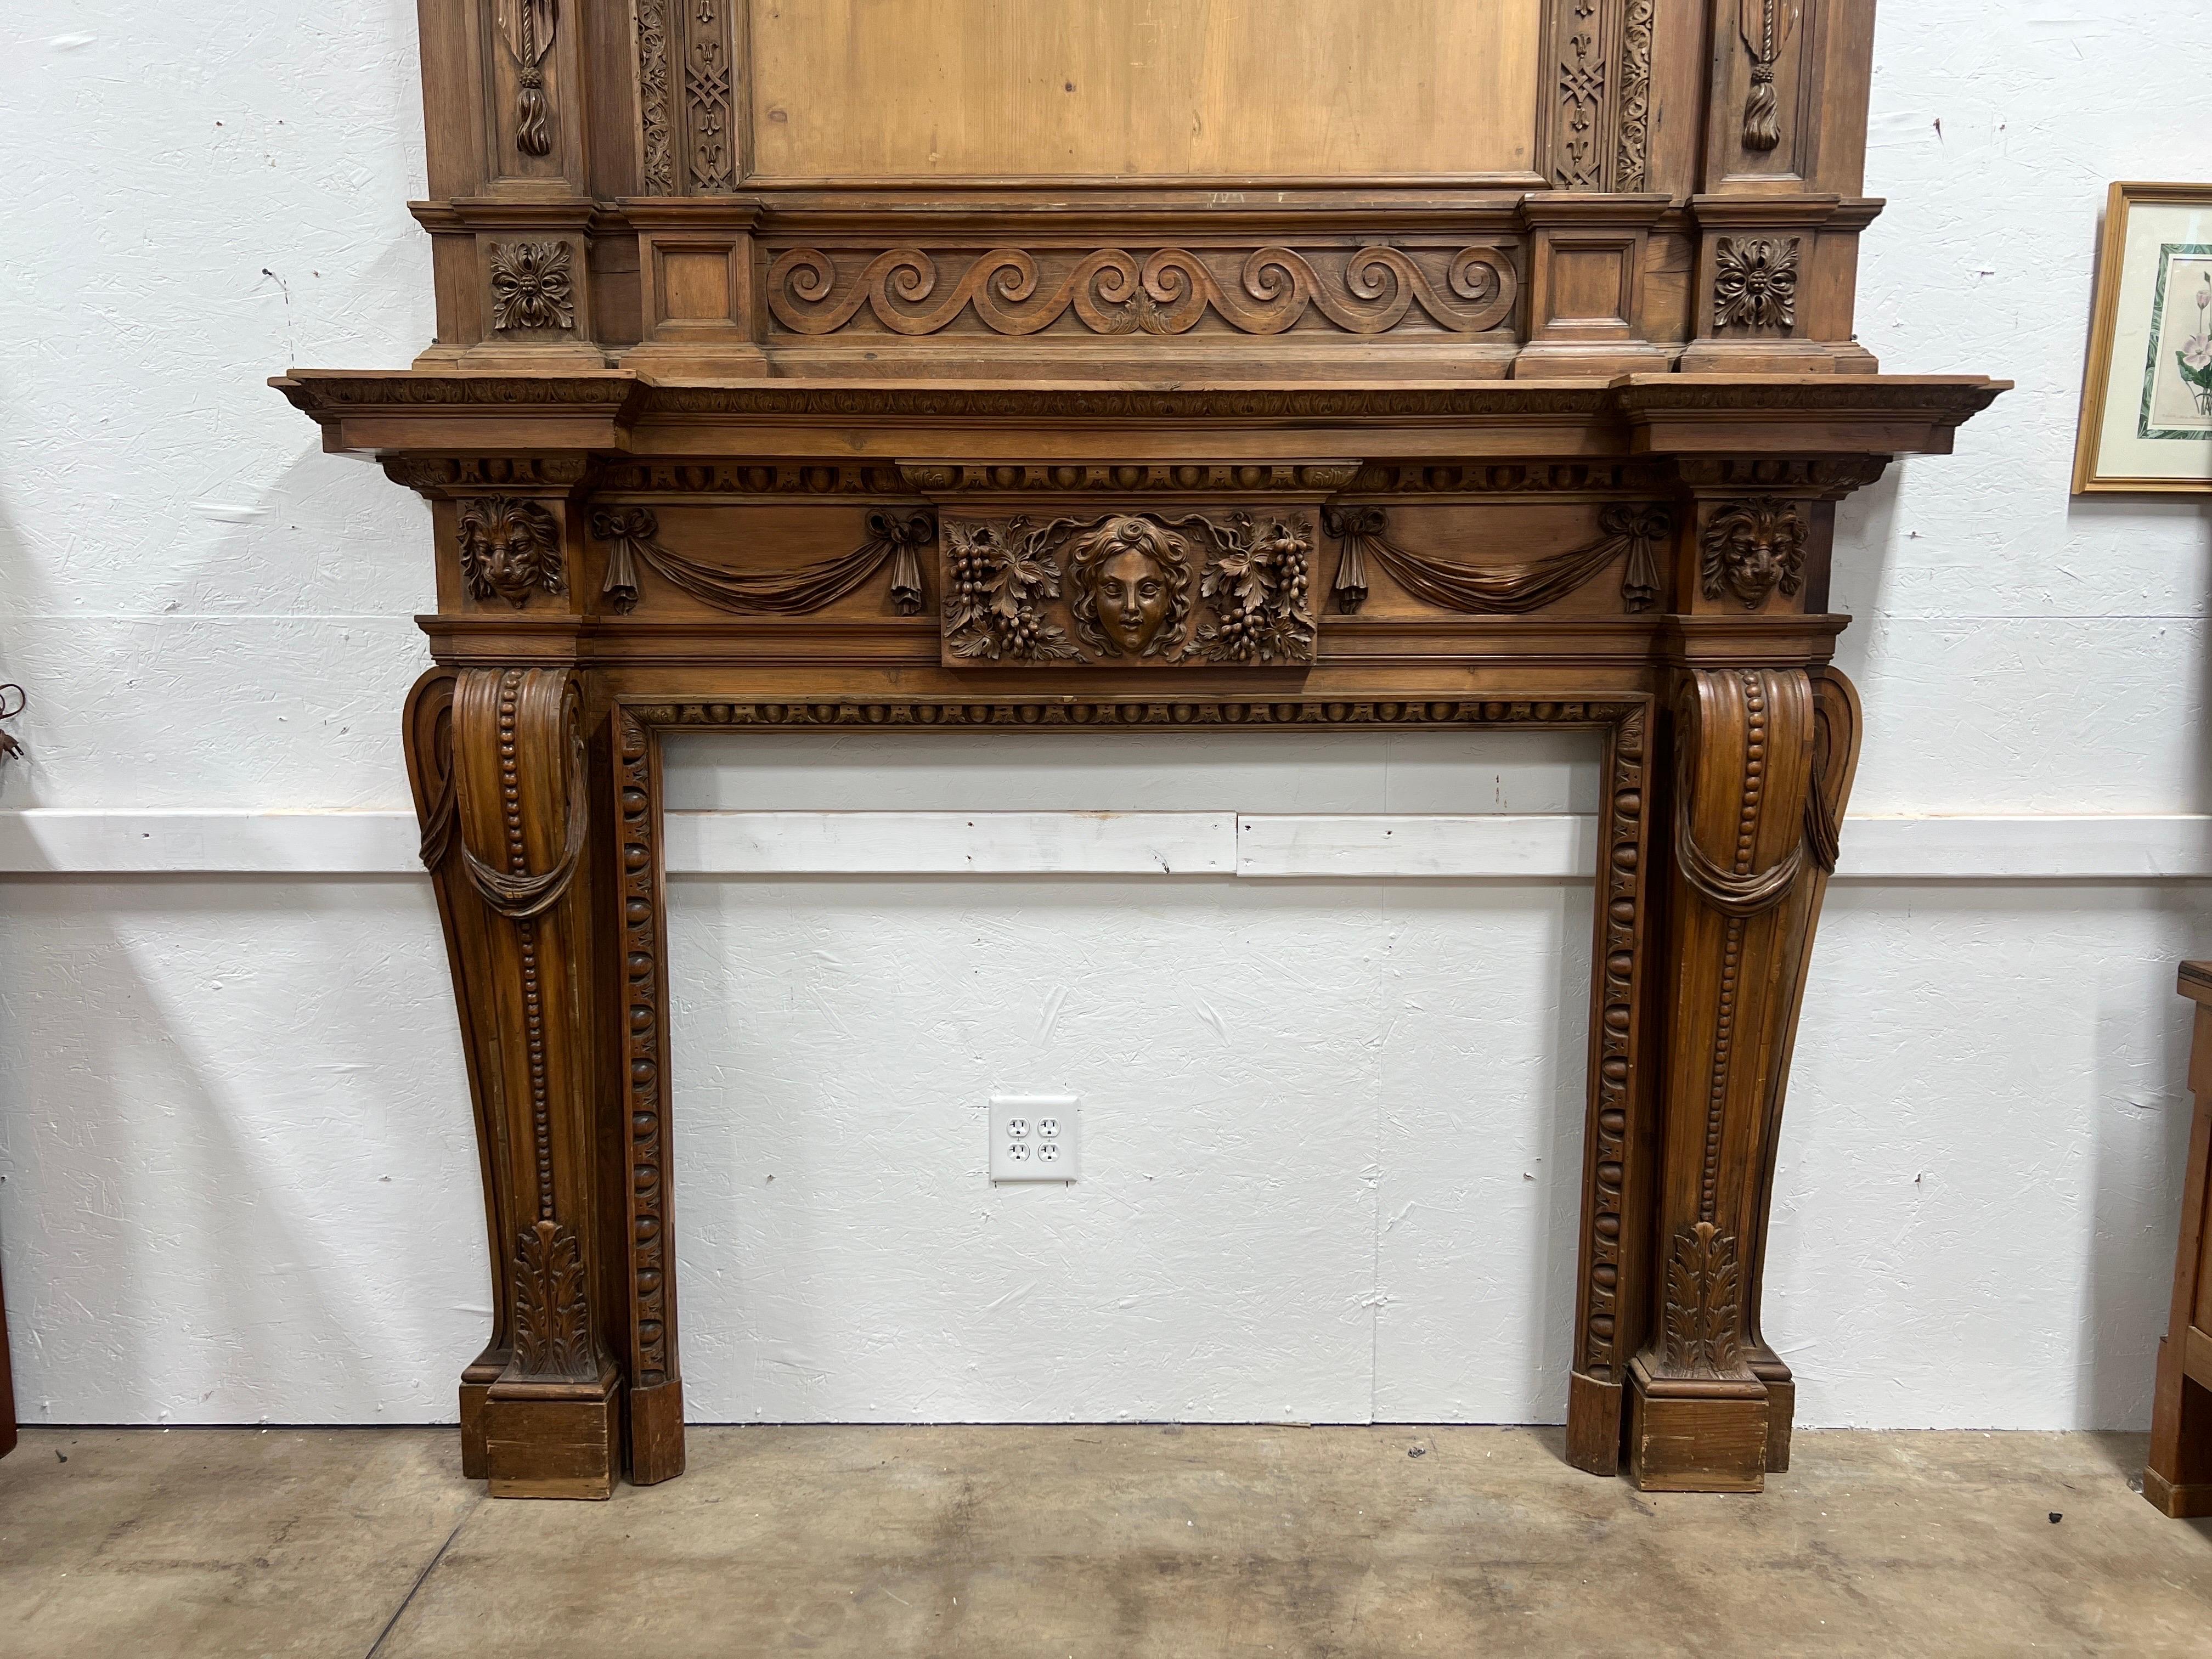 English, 18th century. 

A Palatial 18th Century Georgian Carved Pine Mantel with Overmantel, executed in the distinguished style reminiscent of the renowned architect and designer William Kent. 
The fireplace surround features an impressive array